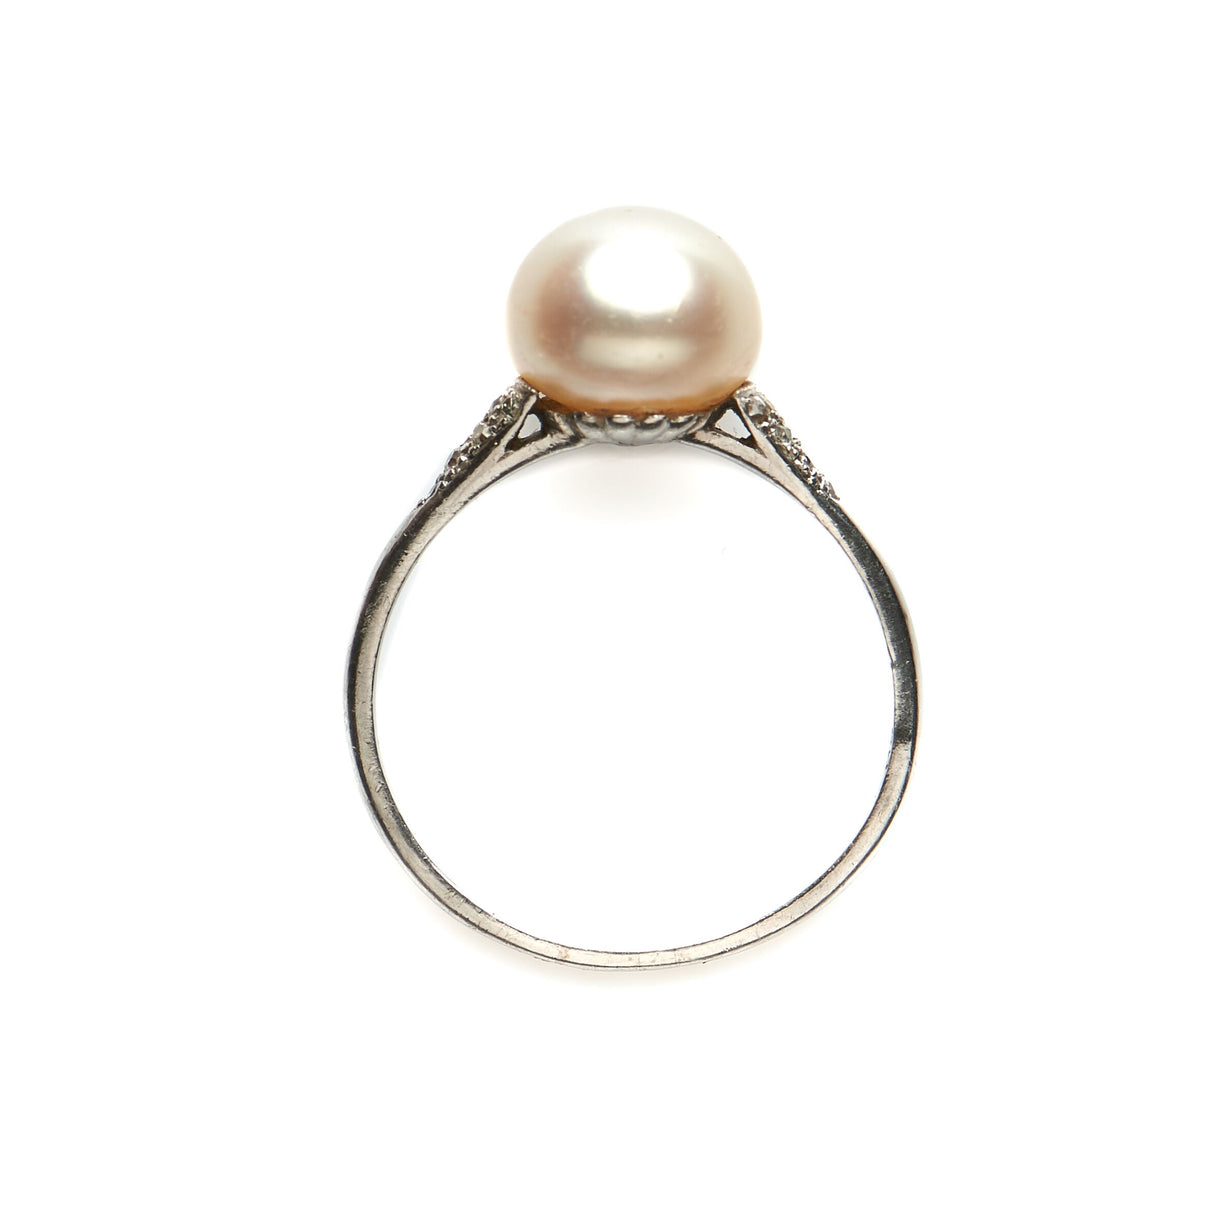 Exceptional, Edwardian, natural pearl & diamond ring